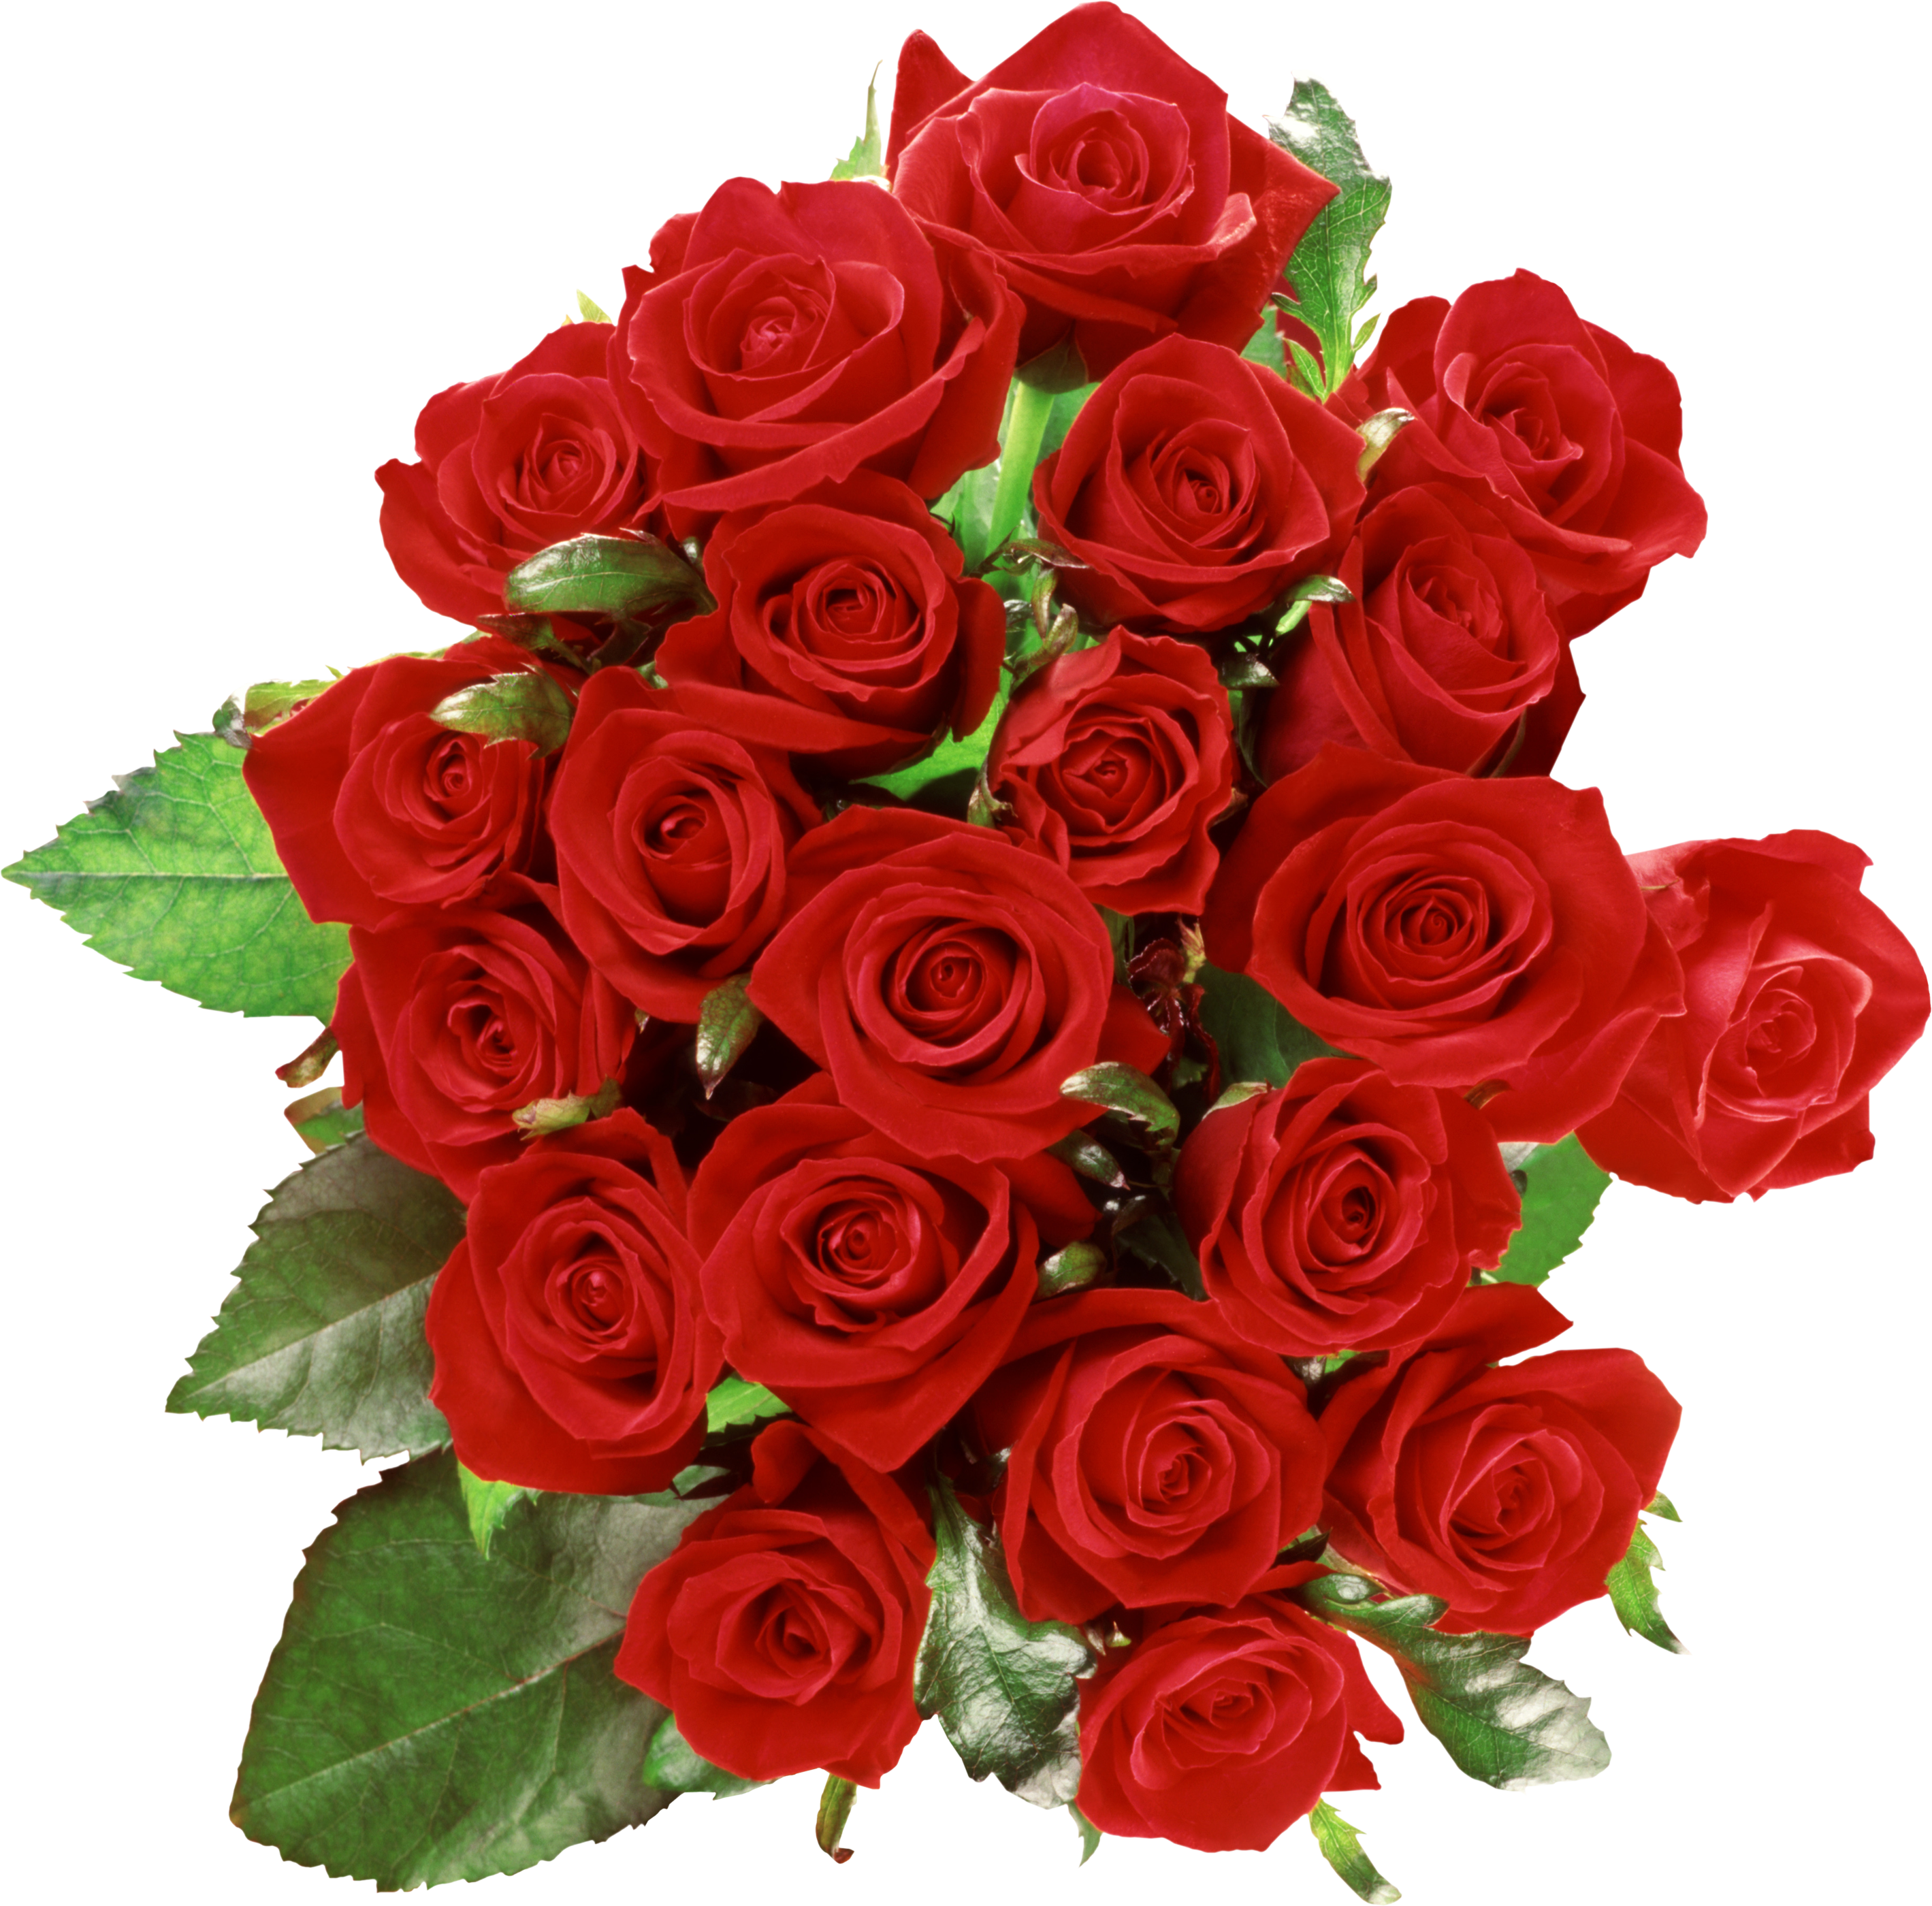 Download PNG image: Bouquet of roses PNG image, free picture download